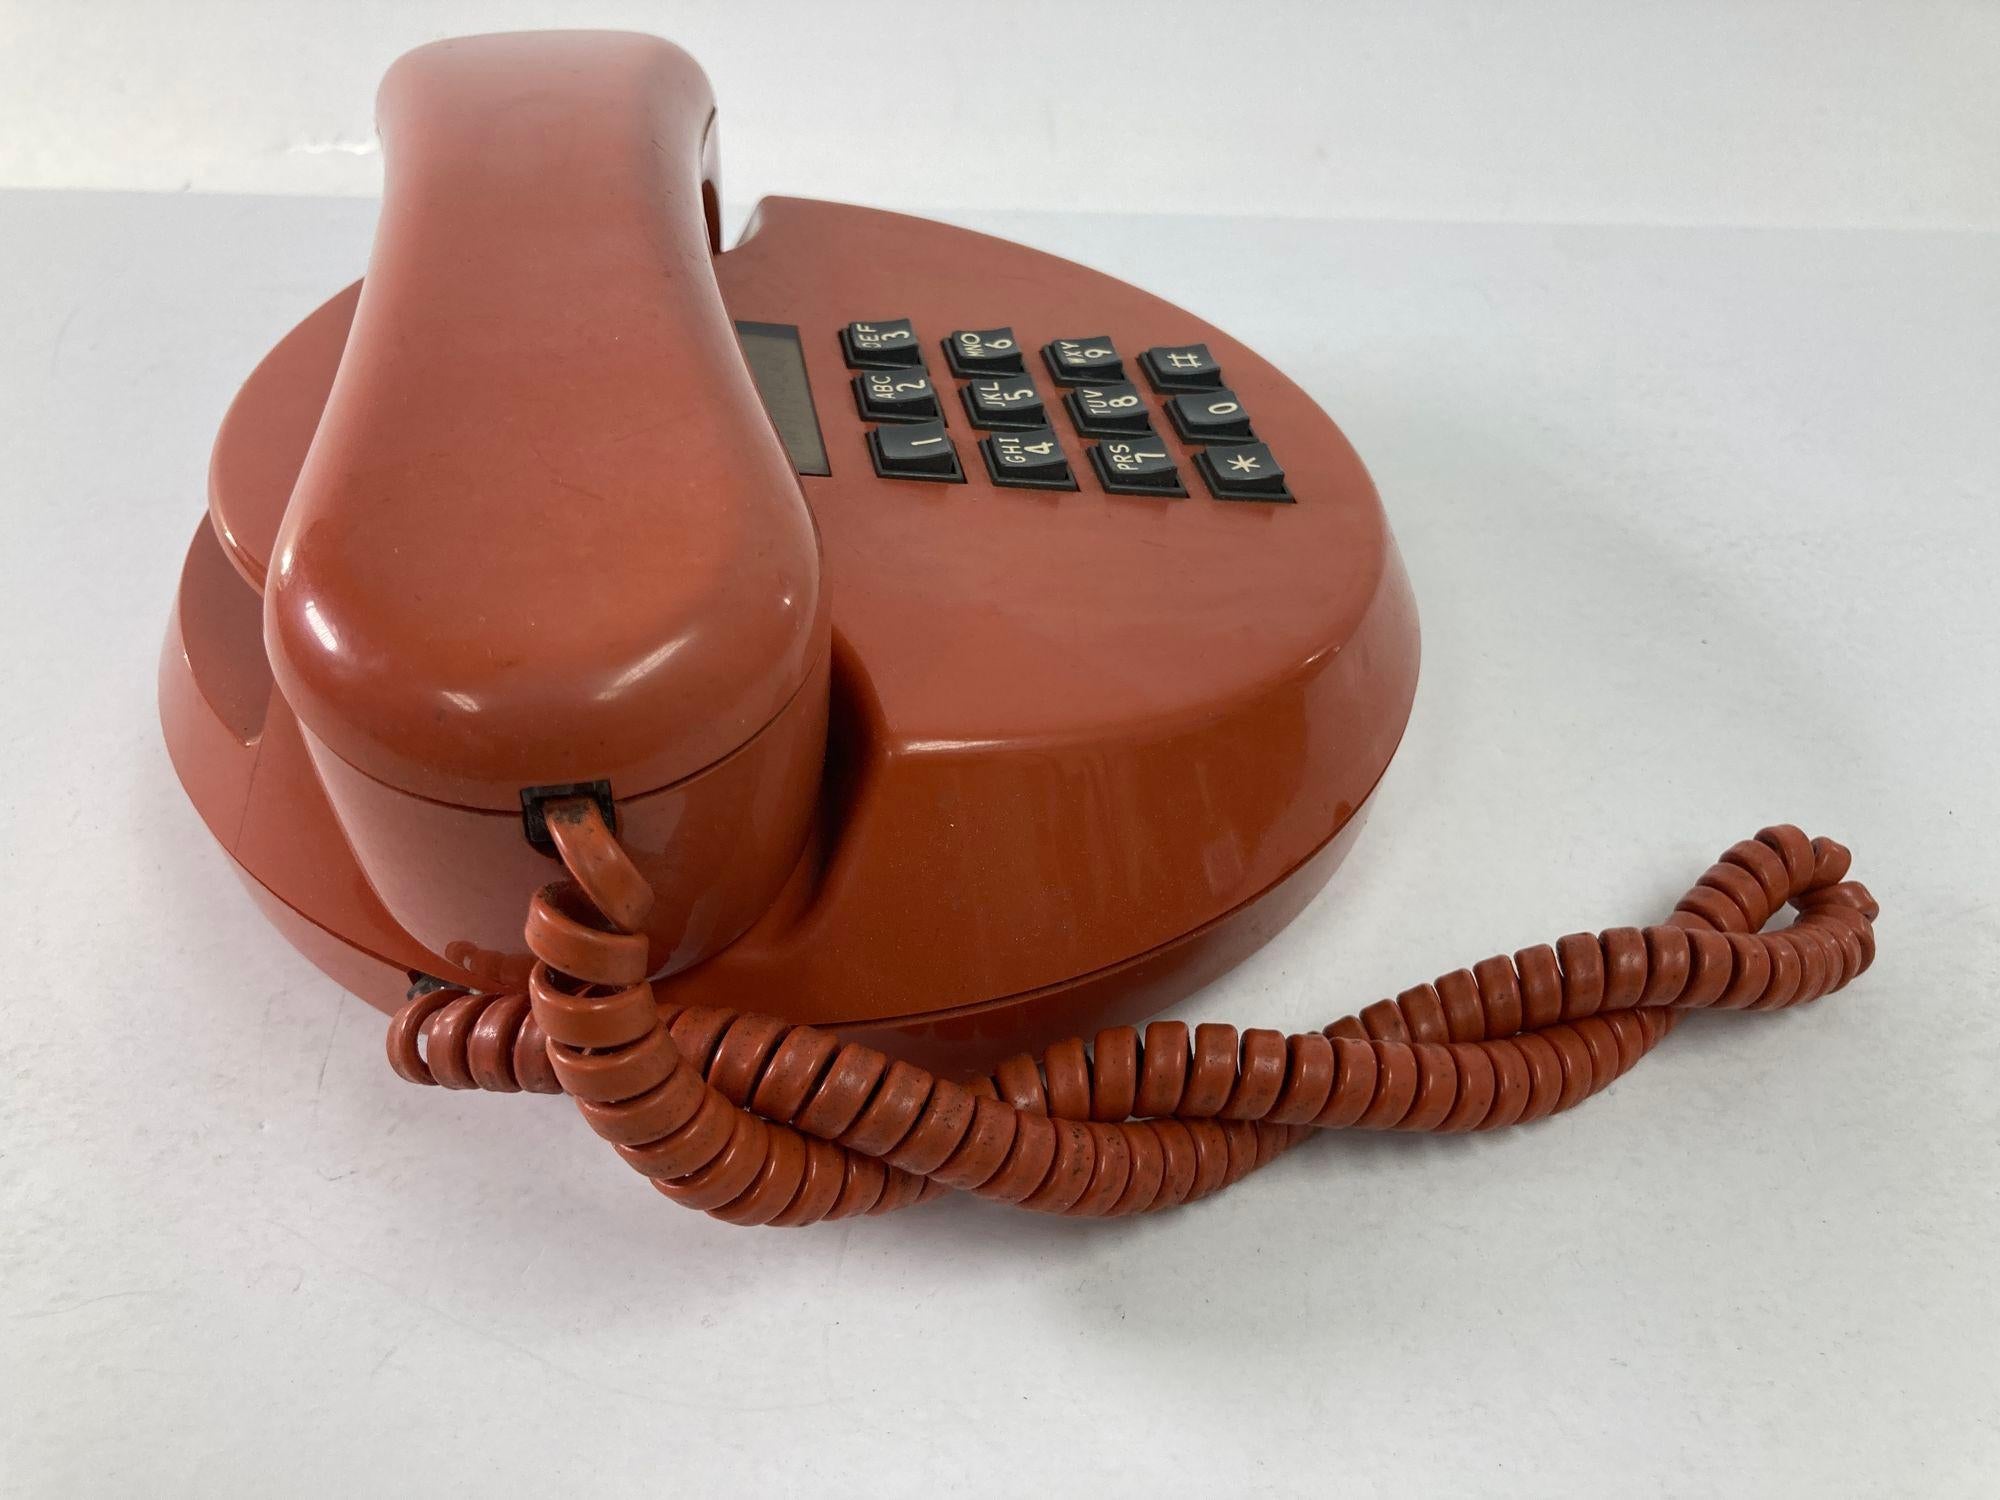 Vintage Retro Push-Button Round Telephone Burnt Orange Color from the, 70s 5